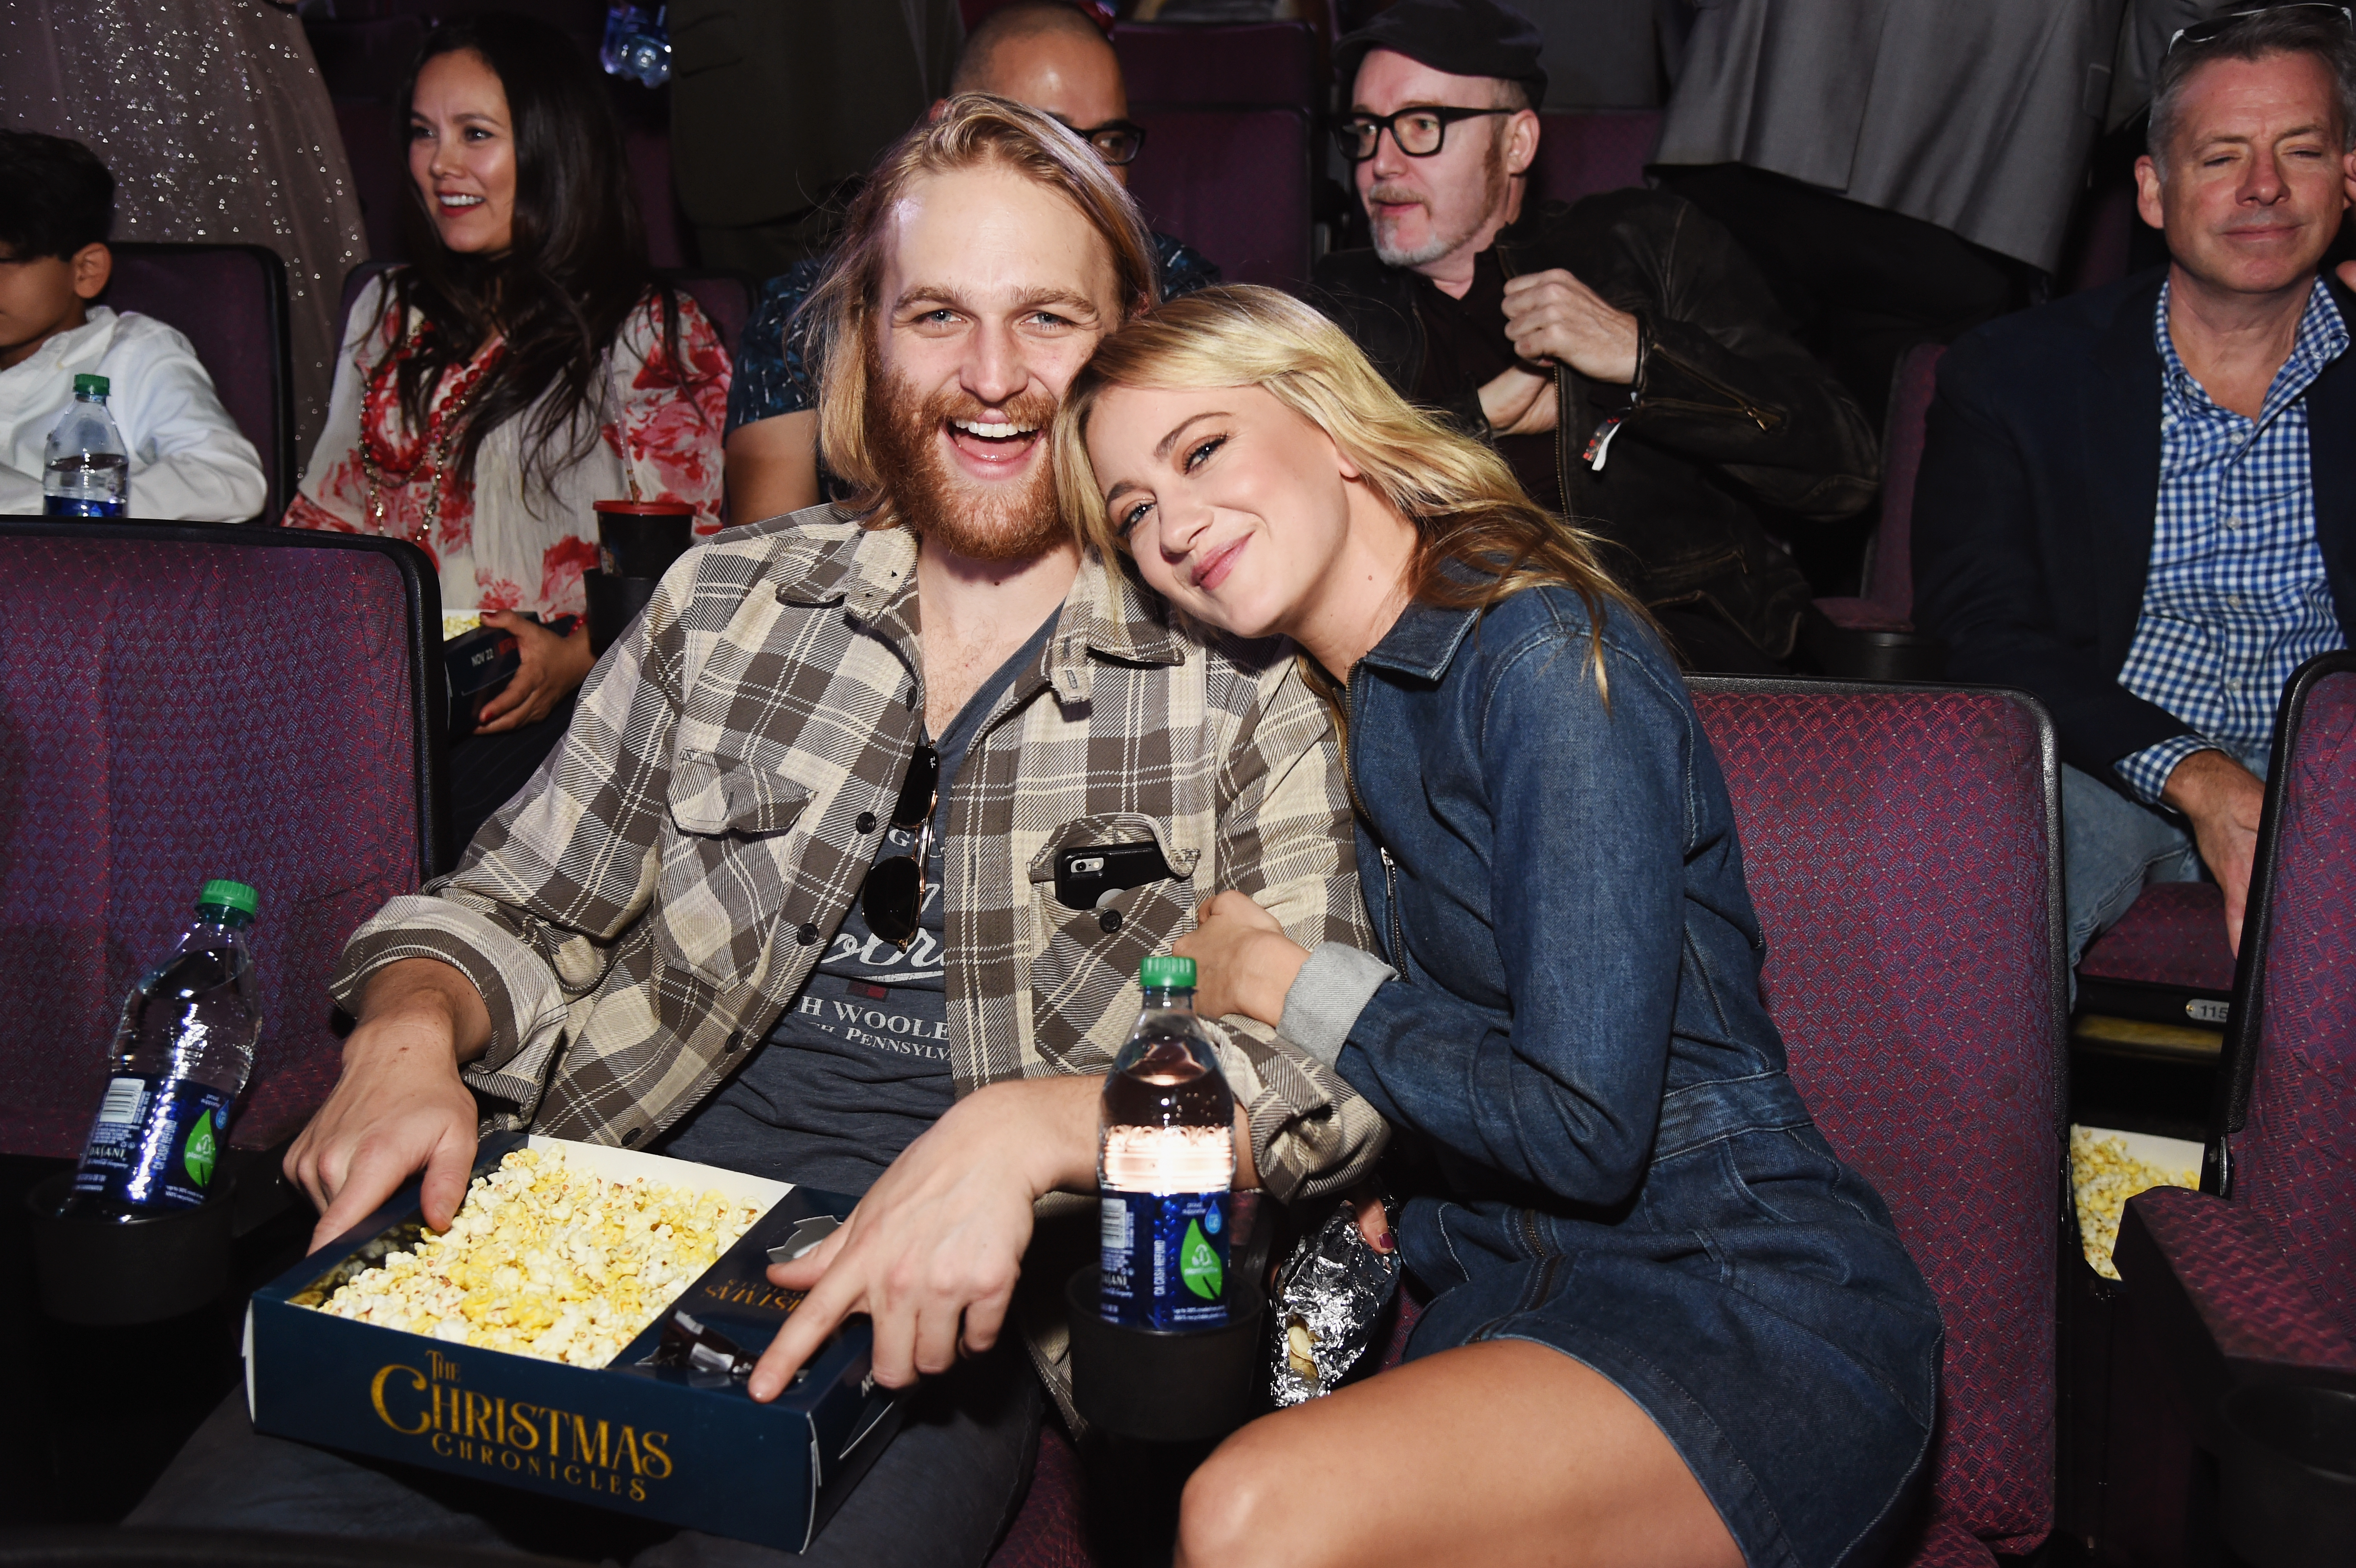 Wyatt Russell and Meredith Hagner attend the premiere of "The Christmas Chronicles" in Los Angeles, California on November 12, 2018  | Source: Getty Images